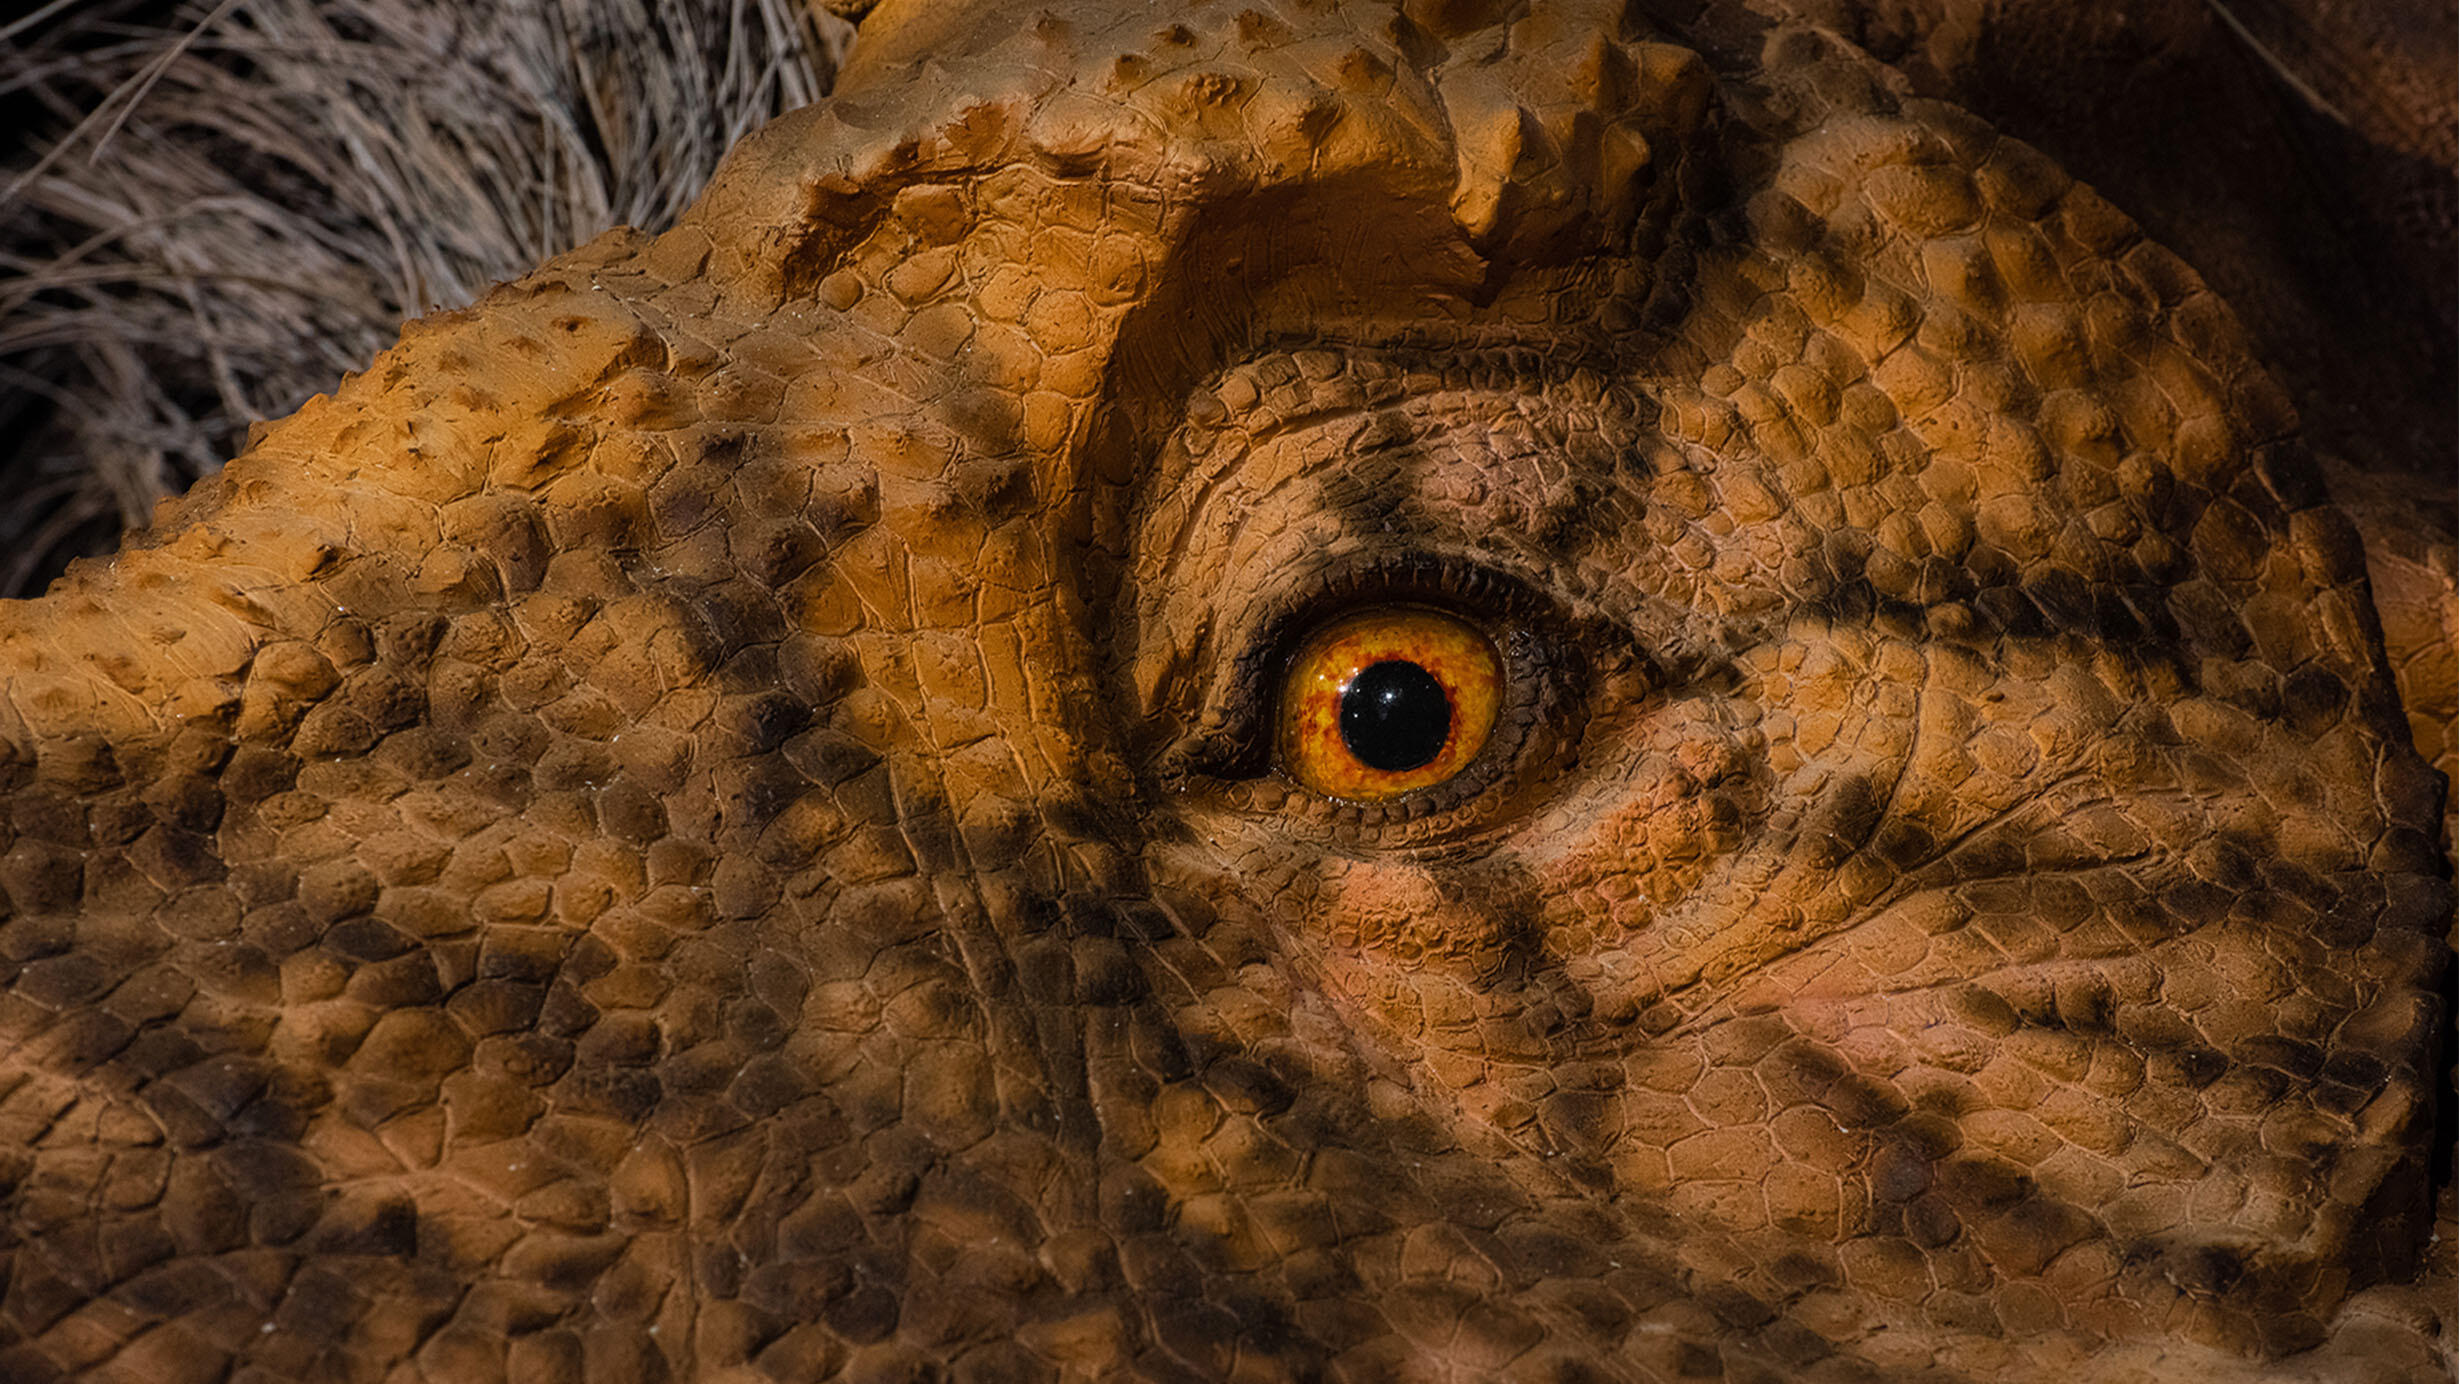 Closeup of the eye of the life-sized T. rex model on display in the T. rex: Ultimate Predator Exhibition.